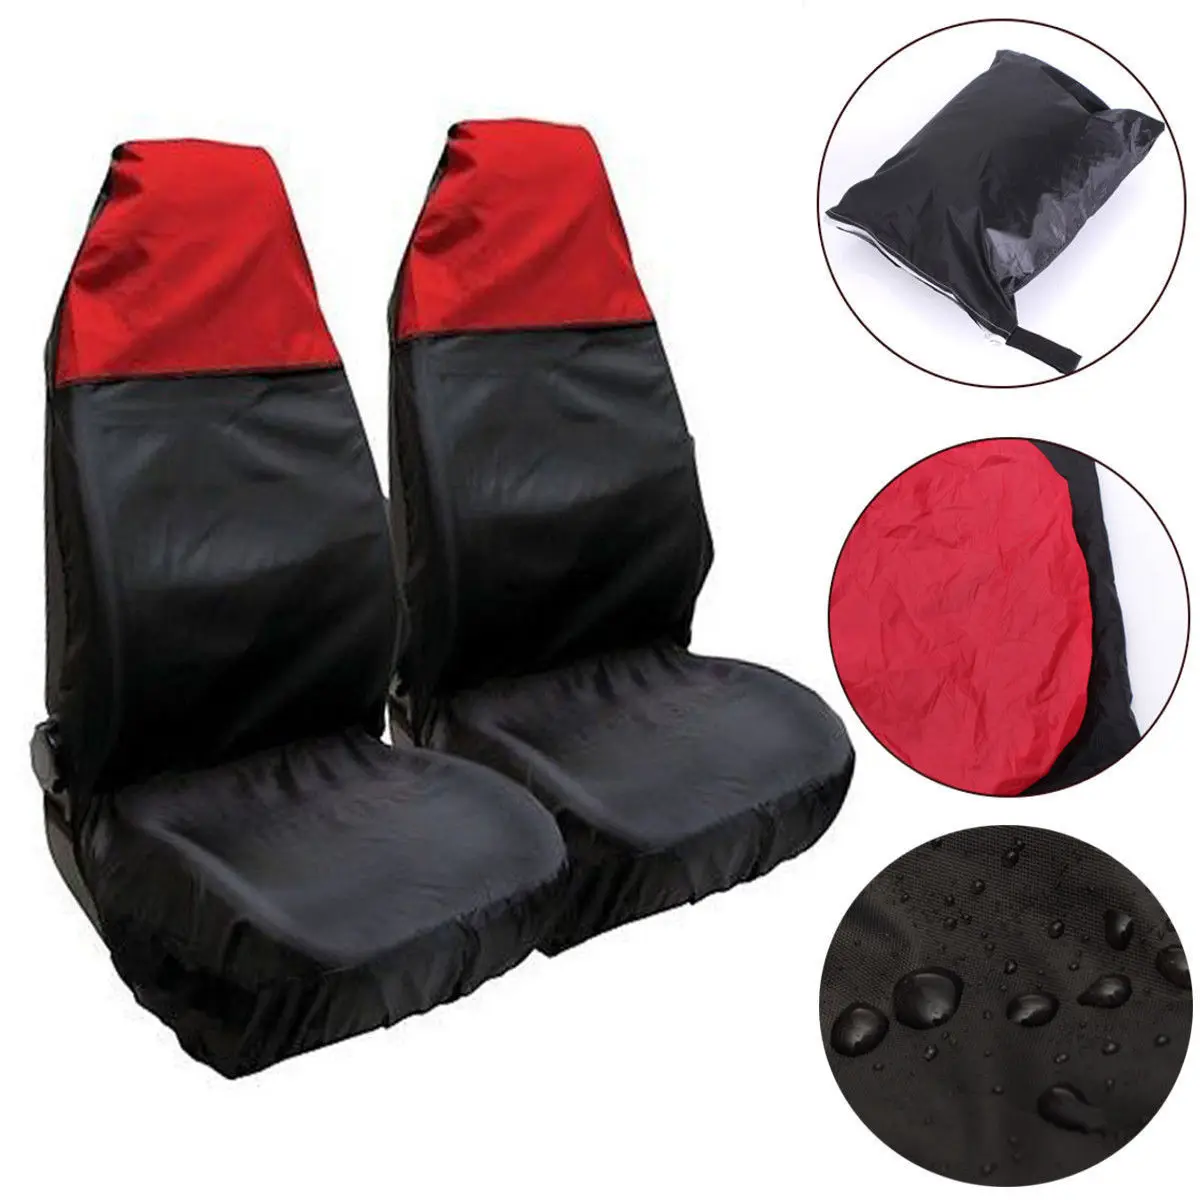 

Automobiles Car Seat Covers Set Universal Fit Most Cars Covers with Tire Track Detail Styling Car Seat Protector